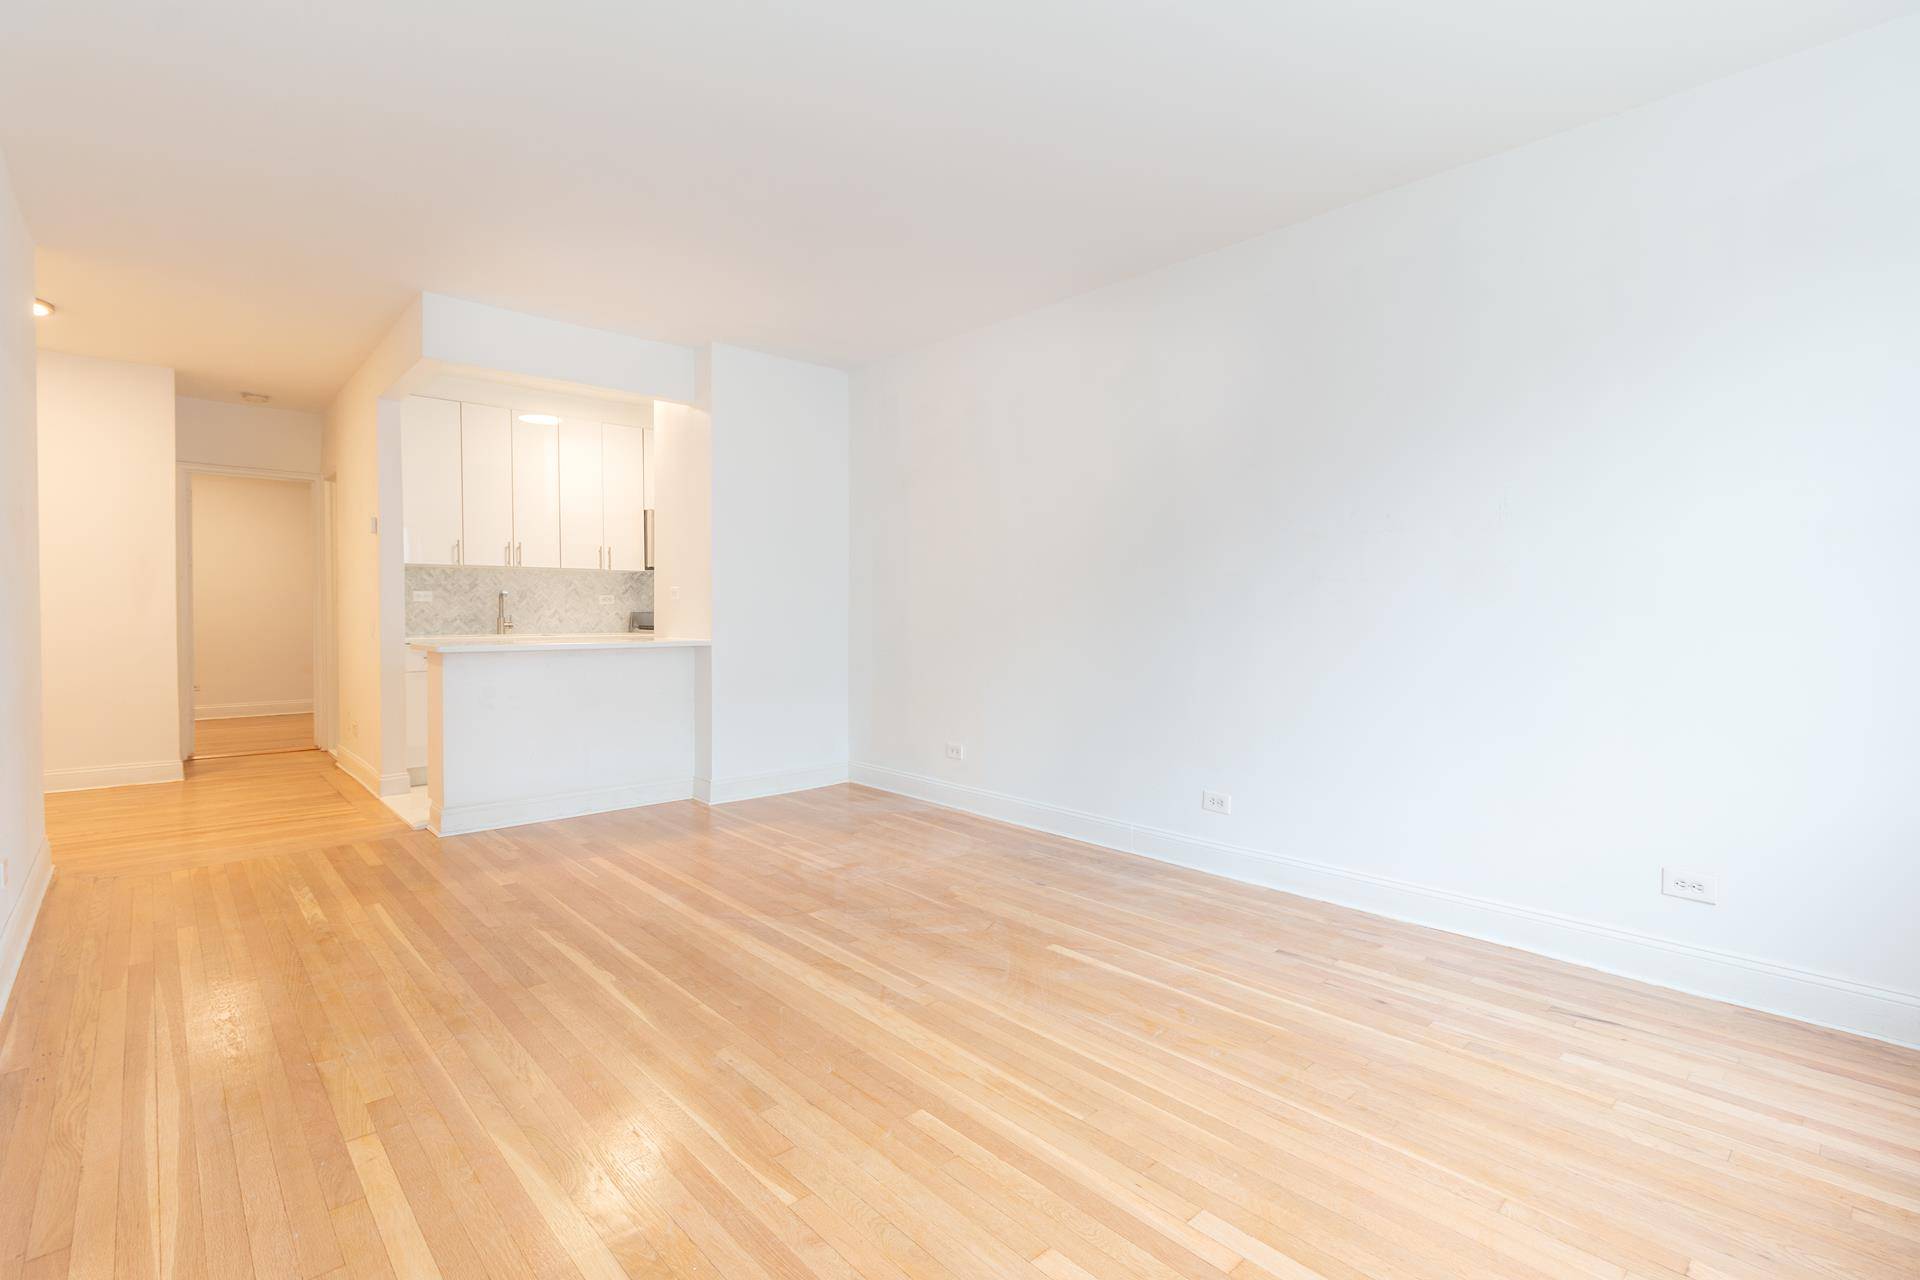 Inviting amp ; Bright South amp ; East Facing One Bedroom Apartment Features a Newly Renovated Open Kitchen with Brand New Quartz Countertop amp ; Island, Marble Herringbone Backsplash and ...